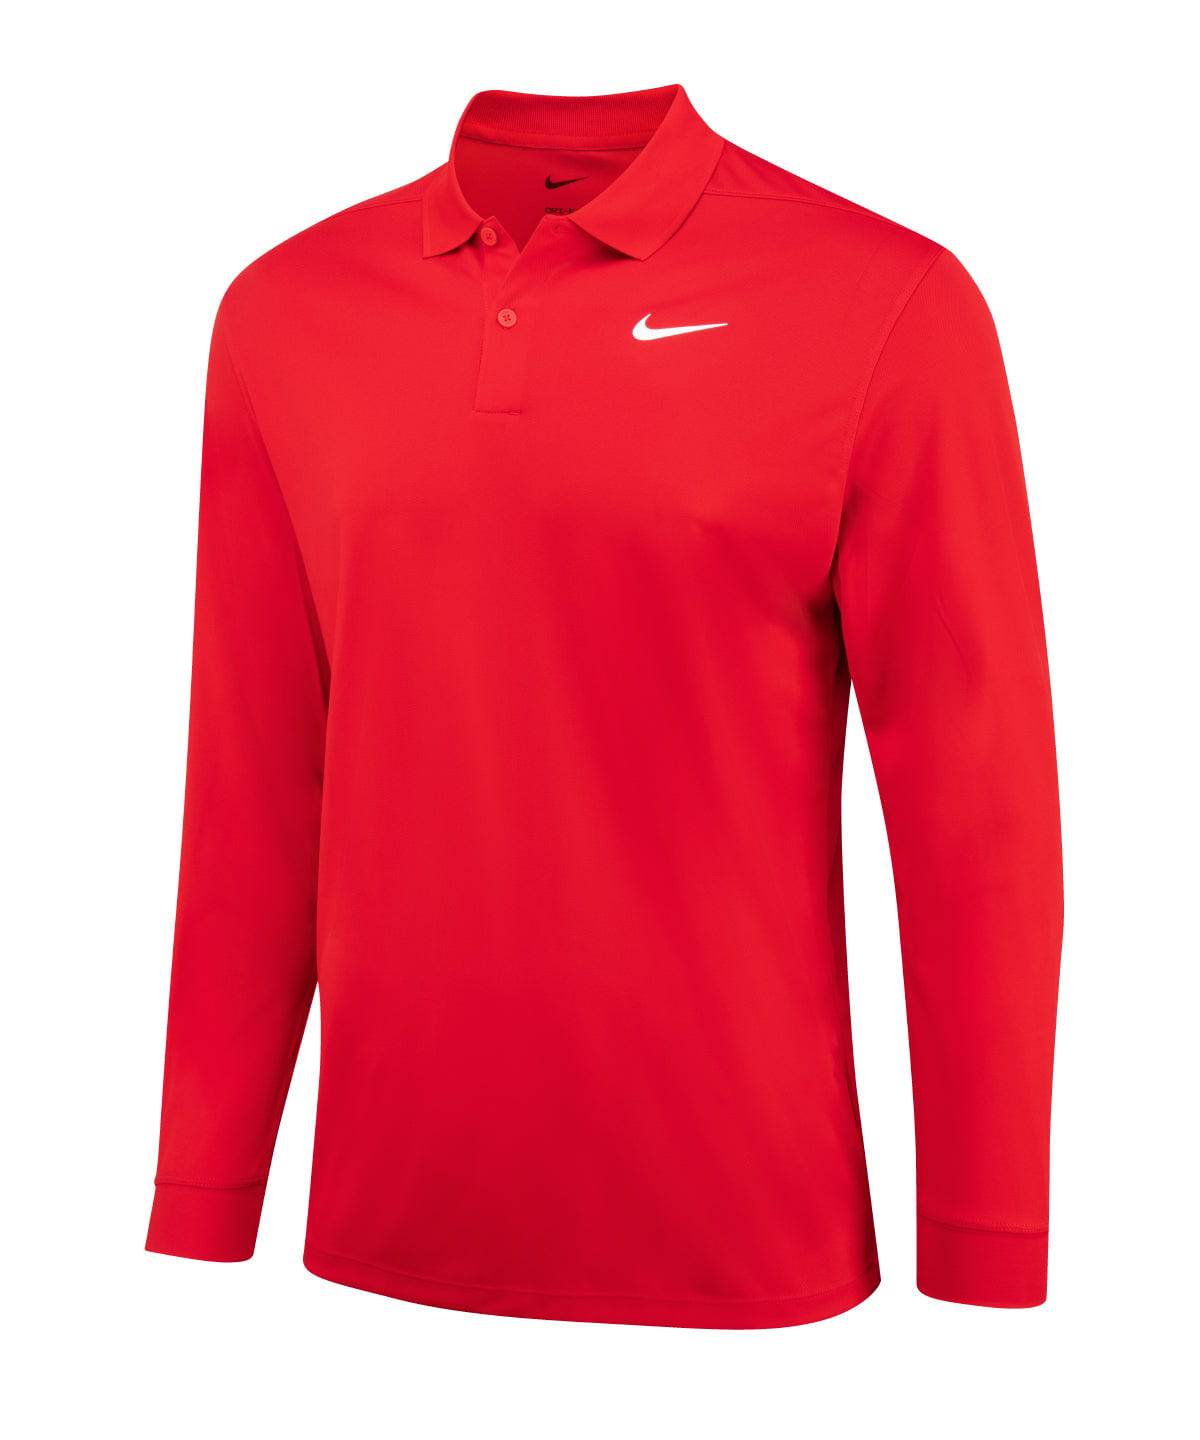 University Red/White - Nike Dri-FIT Victory solid long sleeve polo